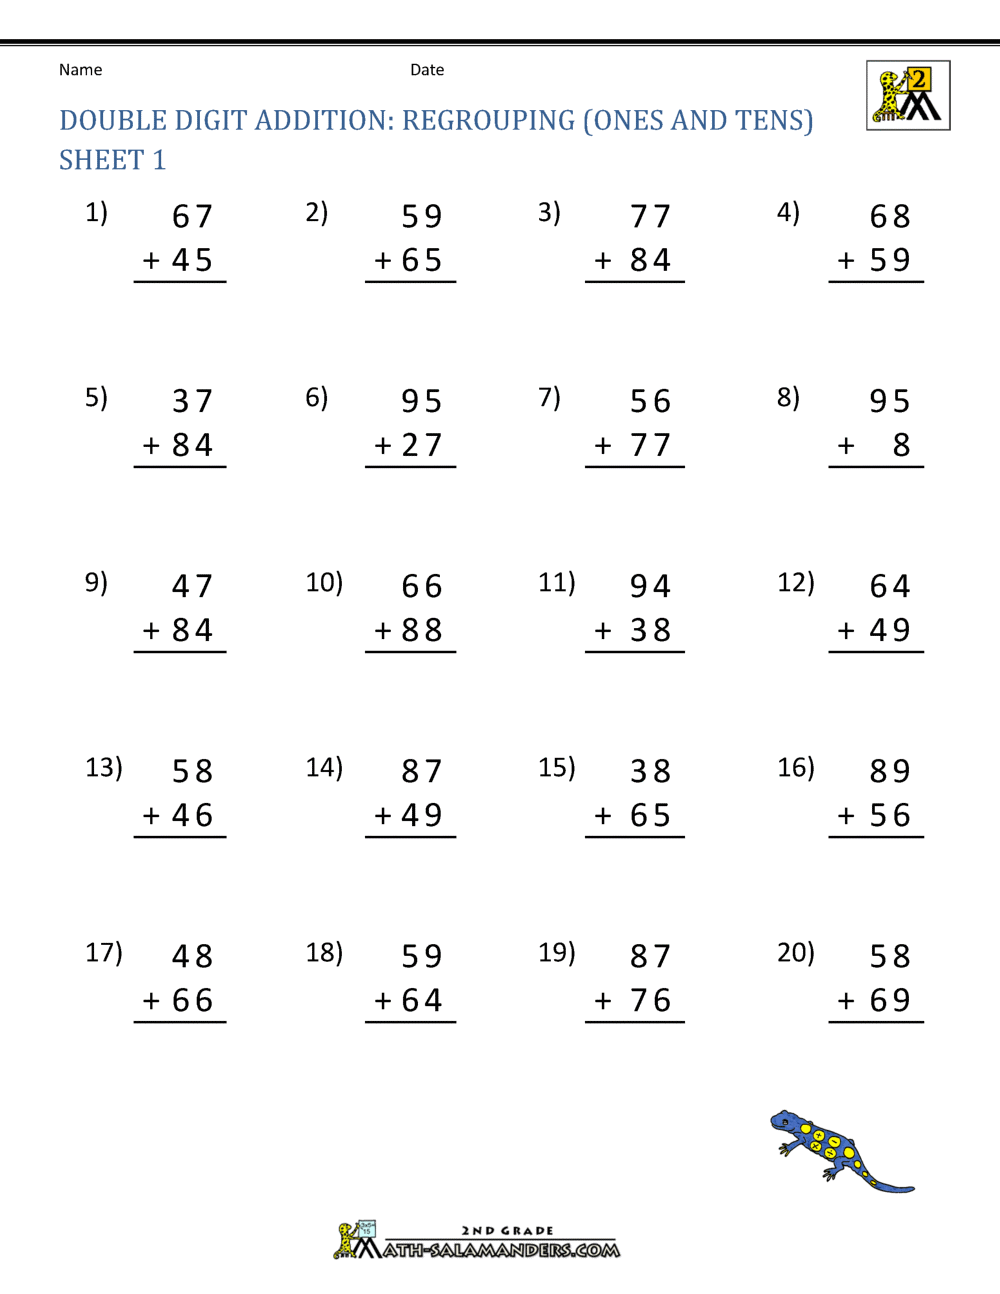 double-digit-addition-with-regrouping